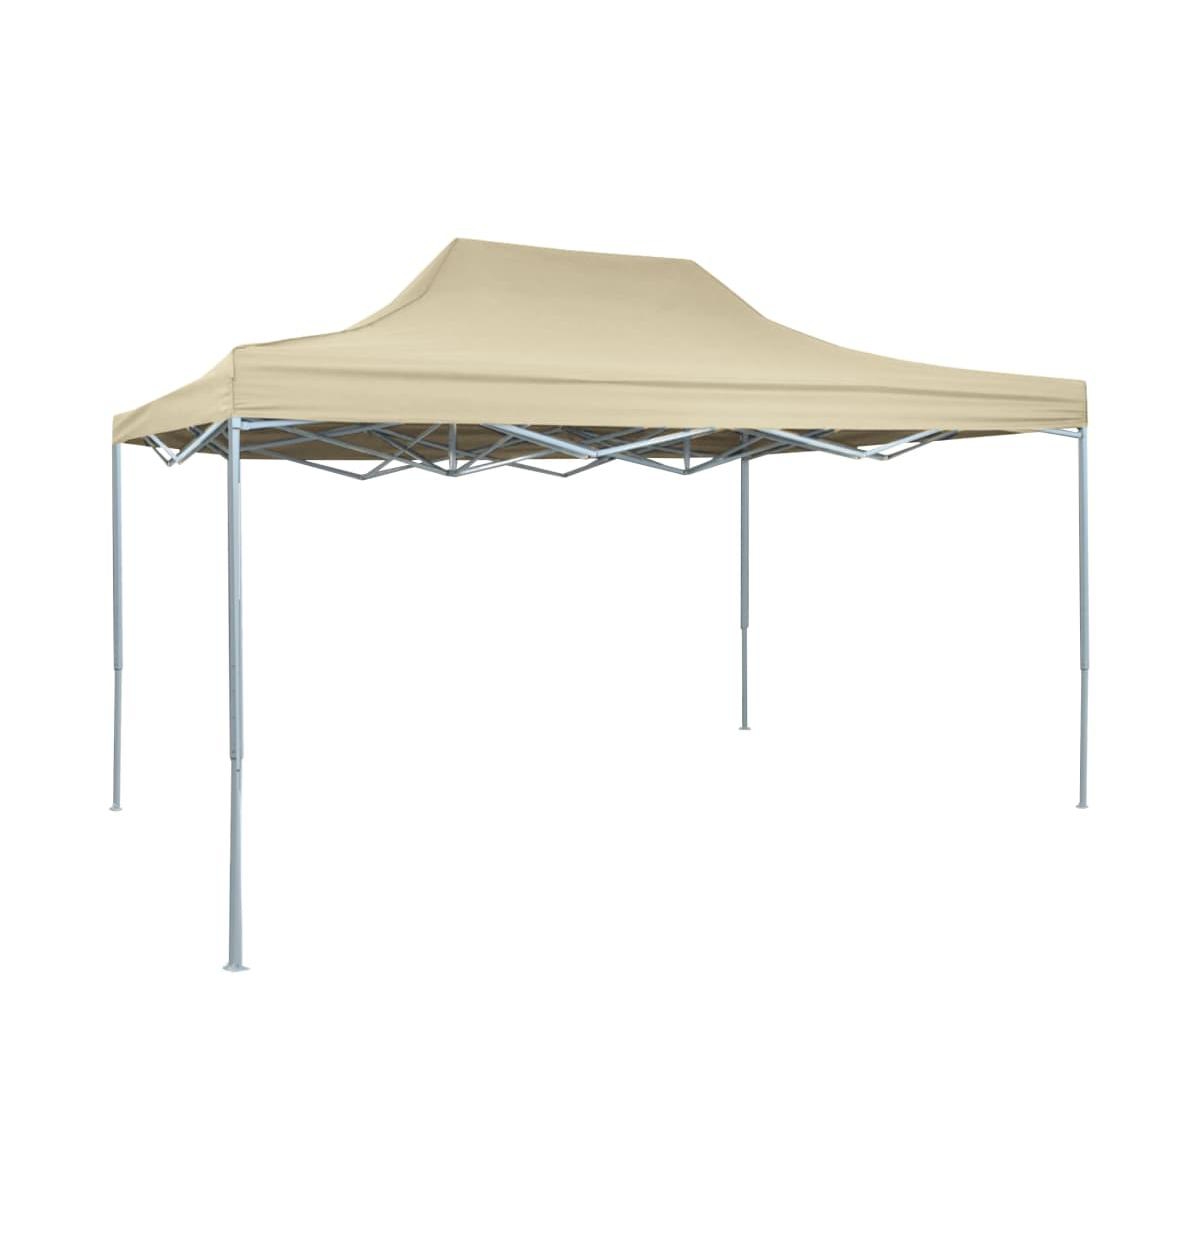 Professional Folding Party Tent 9.8'x13.1' Steel Cream - White